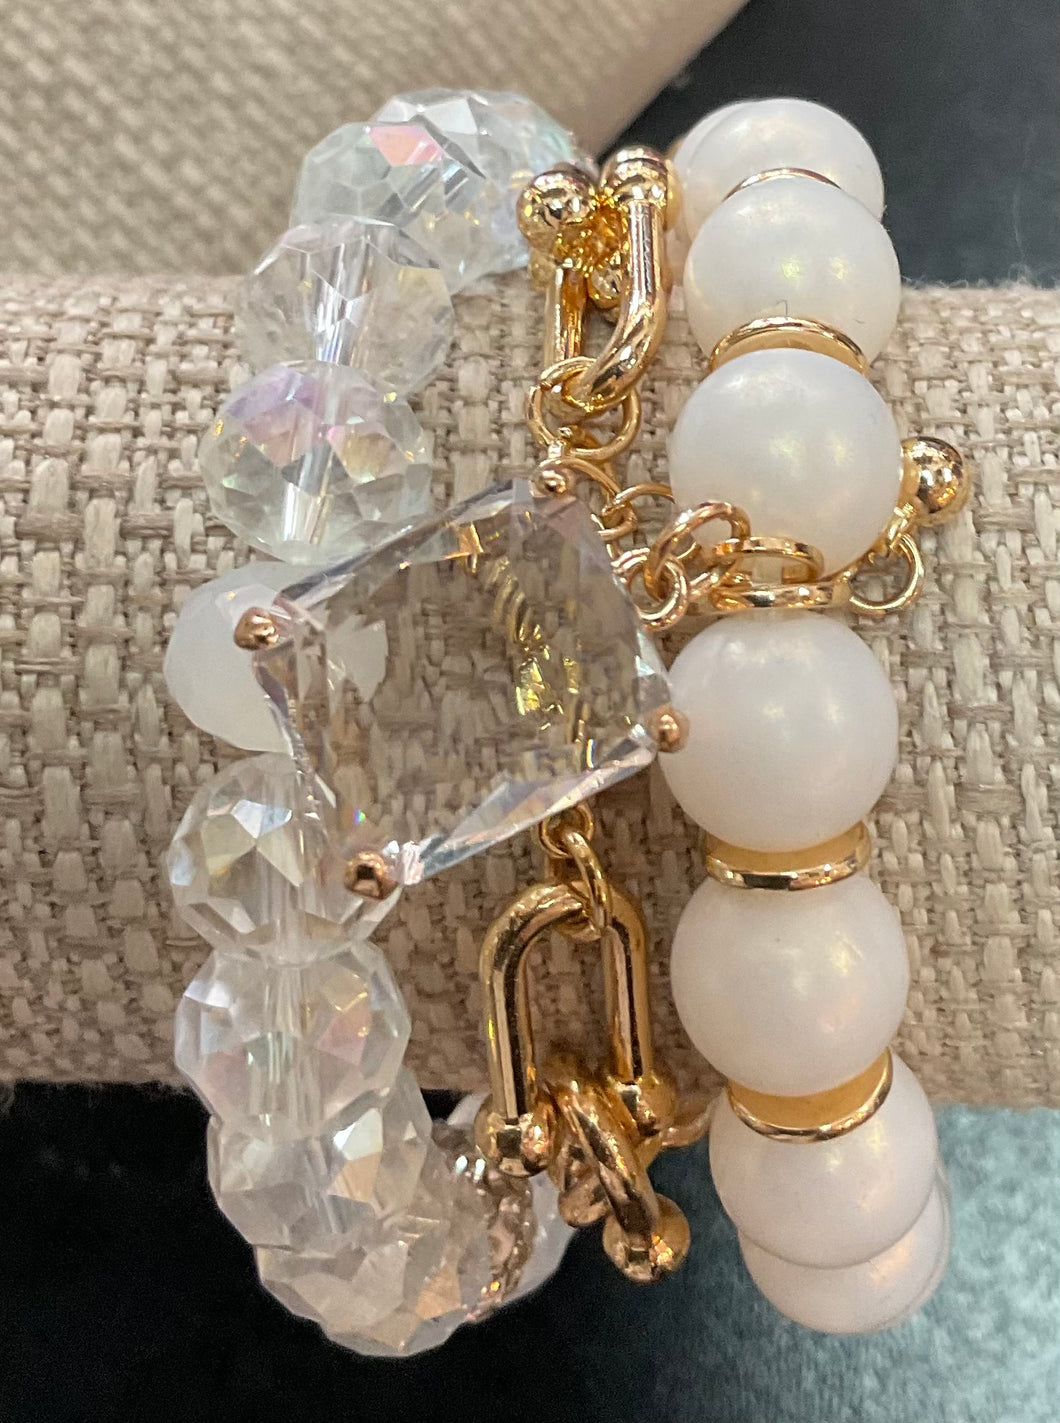 Three Strand Bracelet Sets with Gold and Jewel Accents